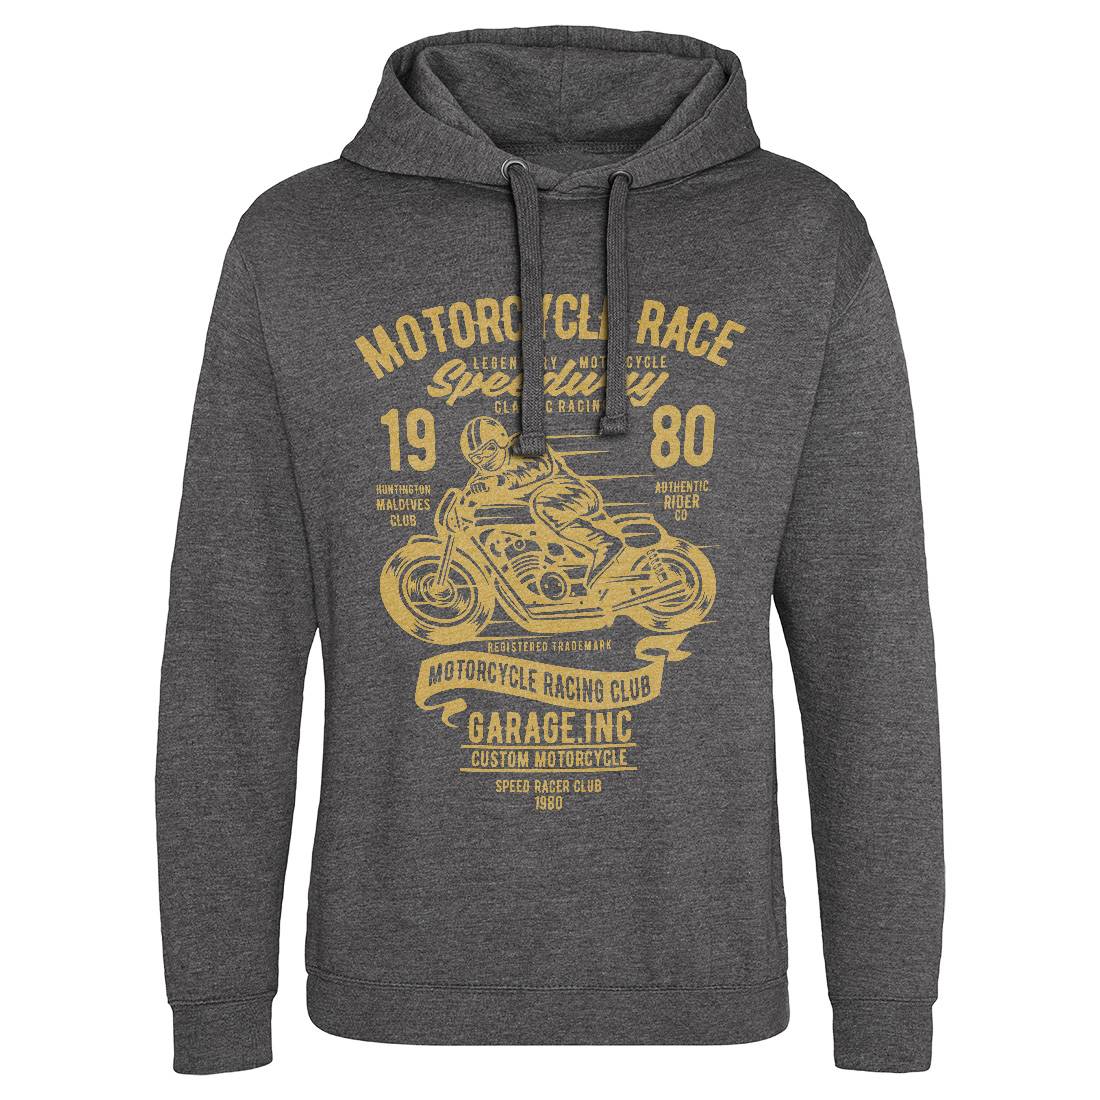 Race Mens Hoodie Without Pocket Motorcycles B426